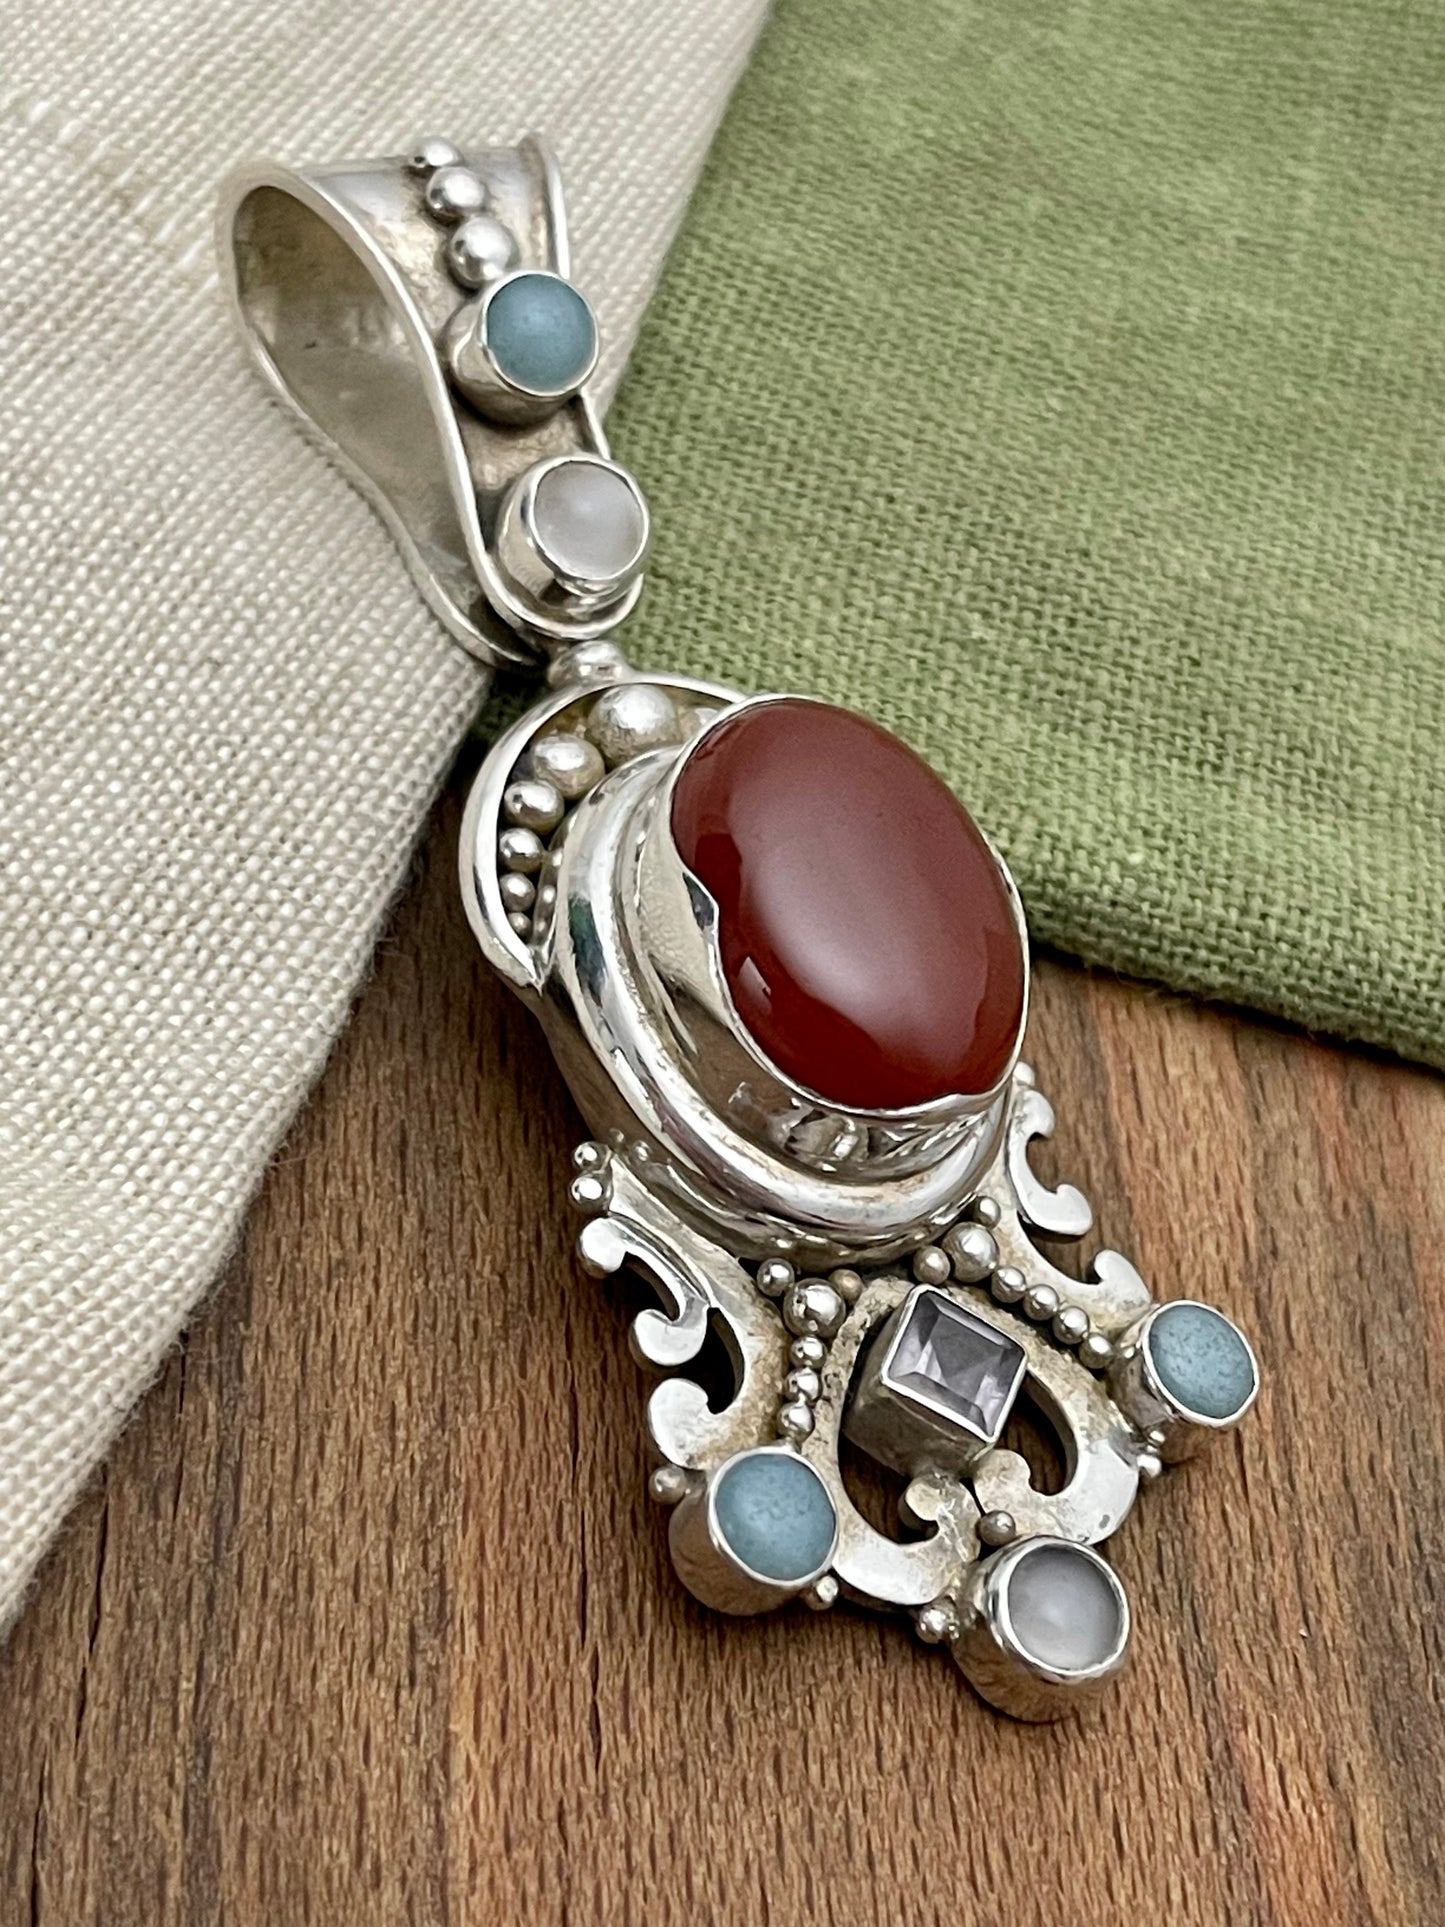 Red Blood Amber and Amethyst Pendant Solid Sterling 925 Silver Vintage Jewelry